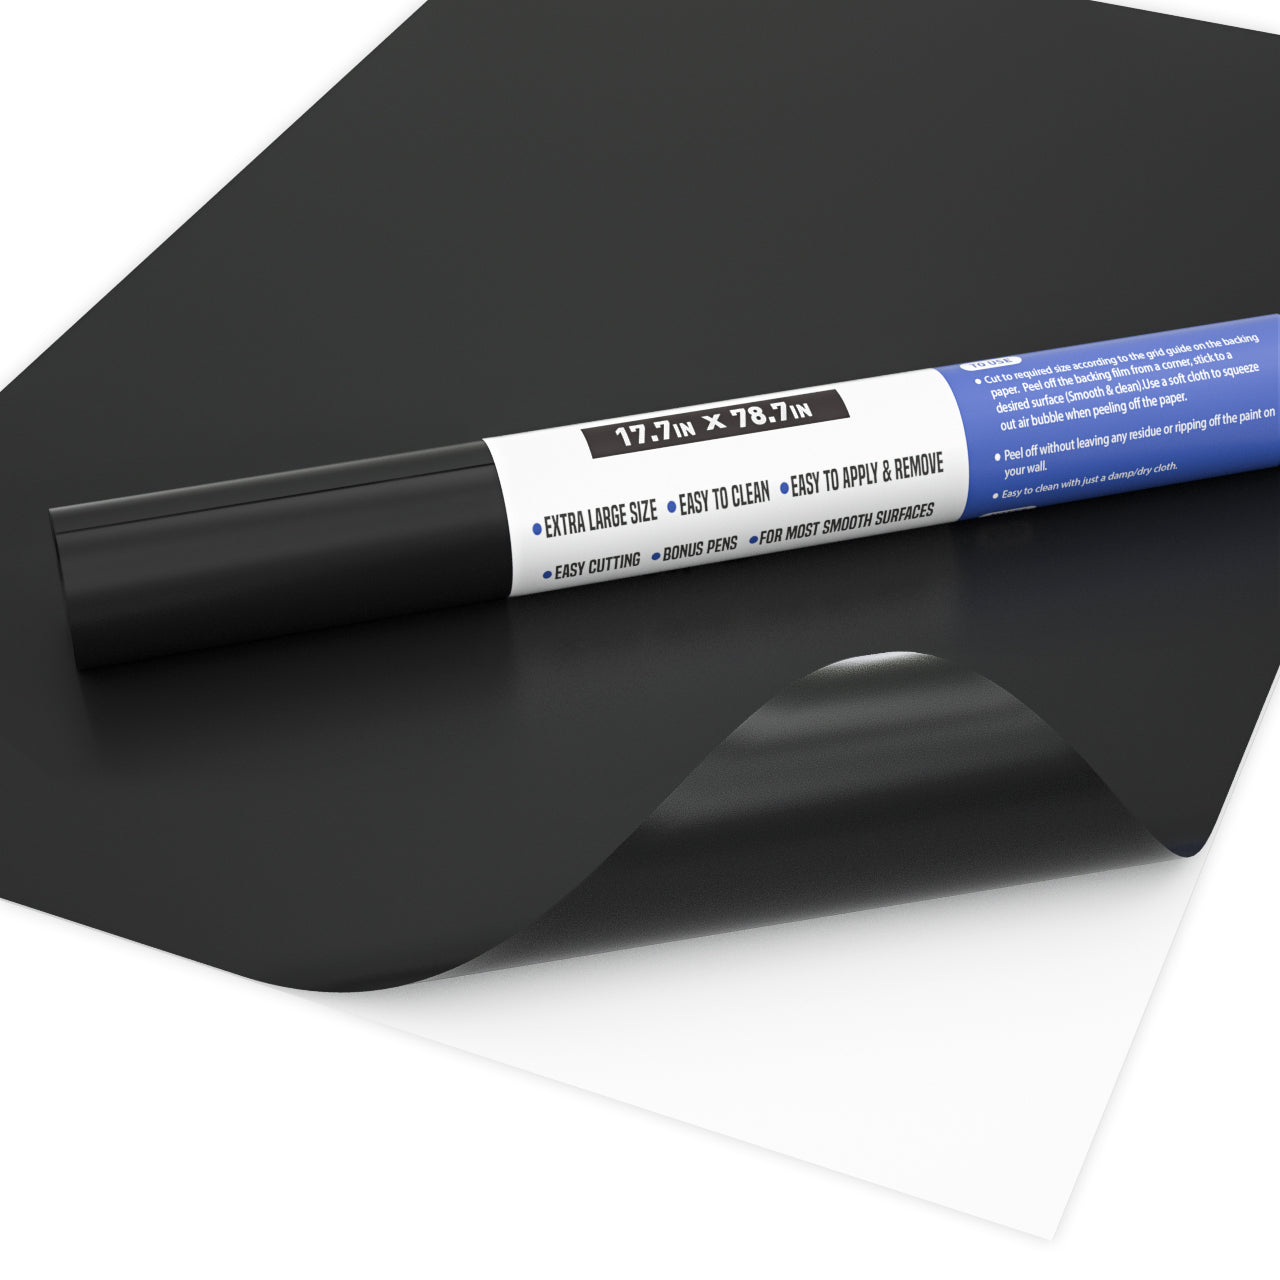 Nicpro Self Adhesive Chalkboard Contact Paper Black 17.7 X 78.7 Chal